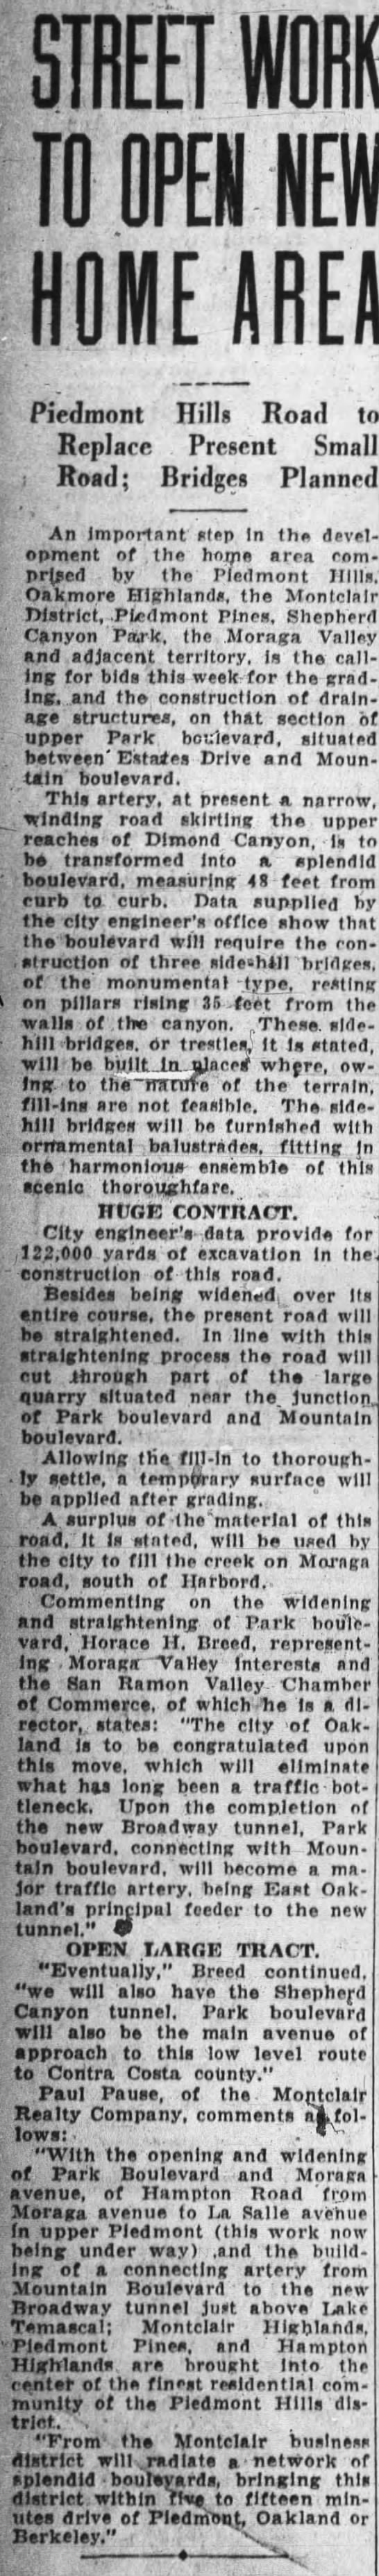 1932 Article about proposed Park Blvd extension - 